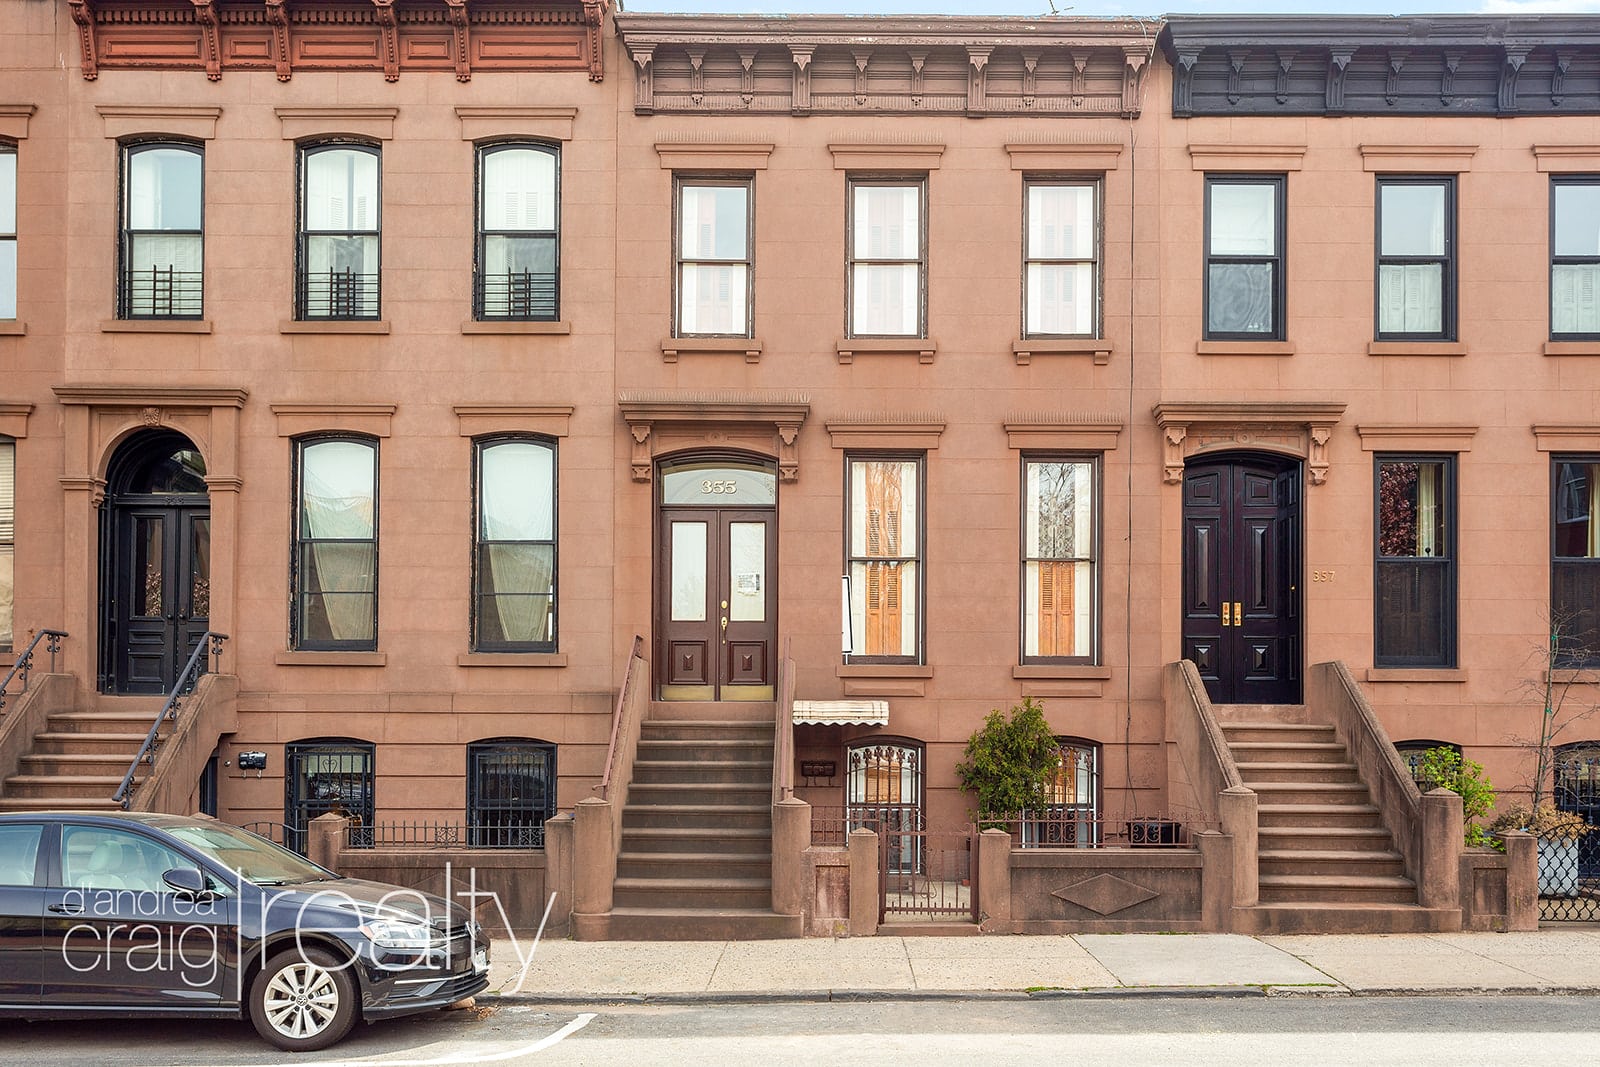 Historic Two Family Brownstone in Carroll Gardens